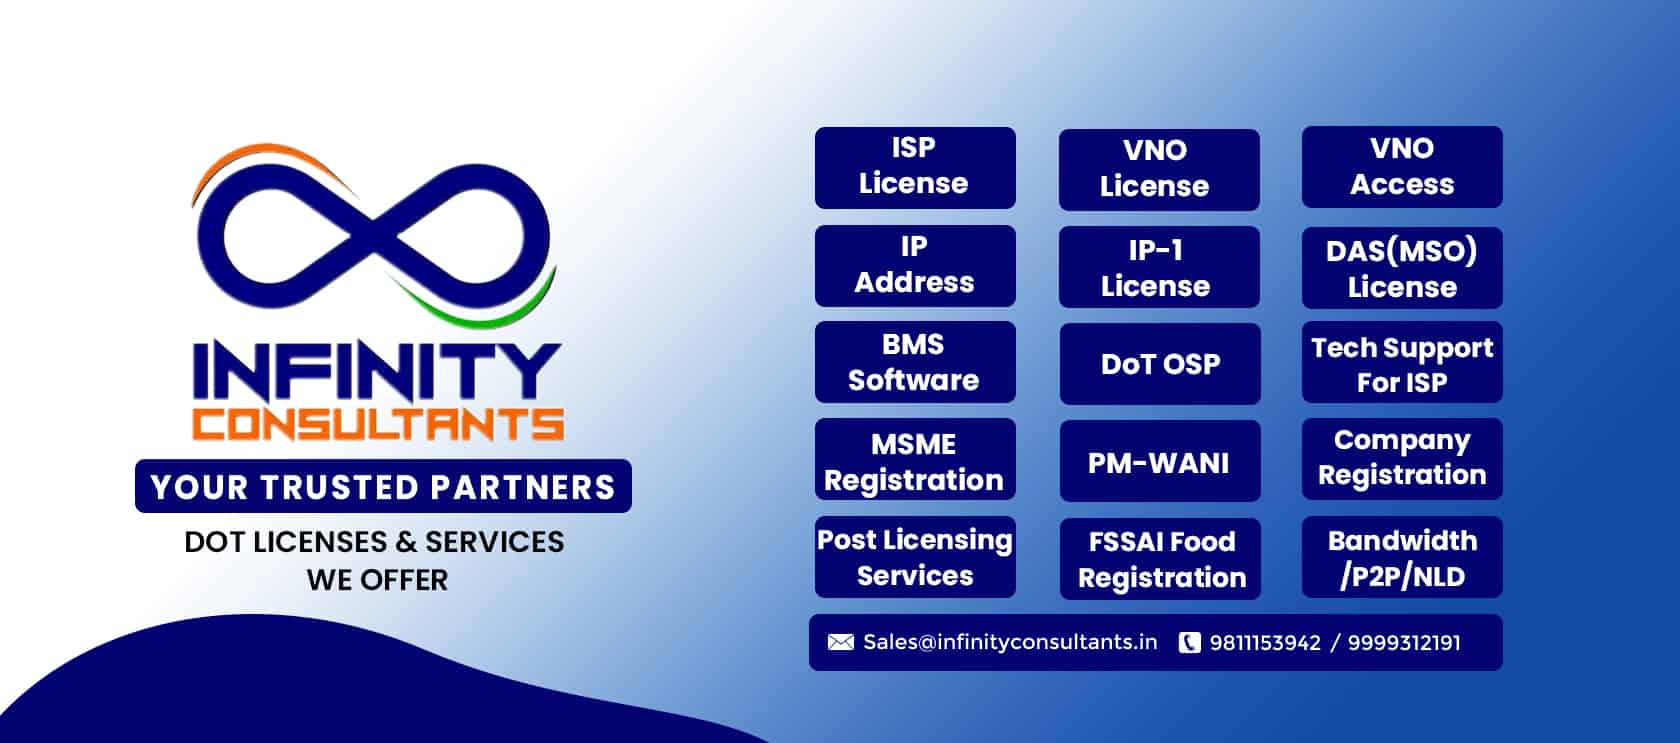 DoT, VNO, ACCESS, DOT OSP, IP One, ISP license Services in India - Infinity Consultants